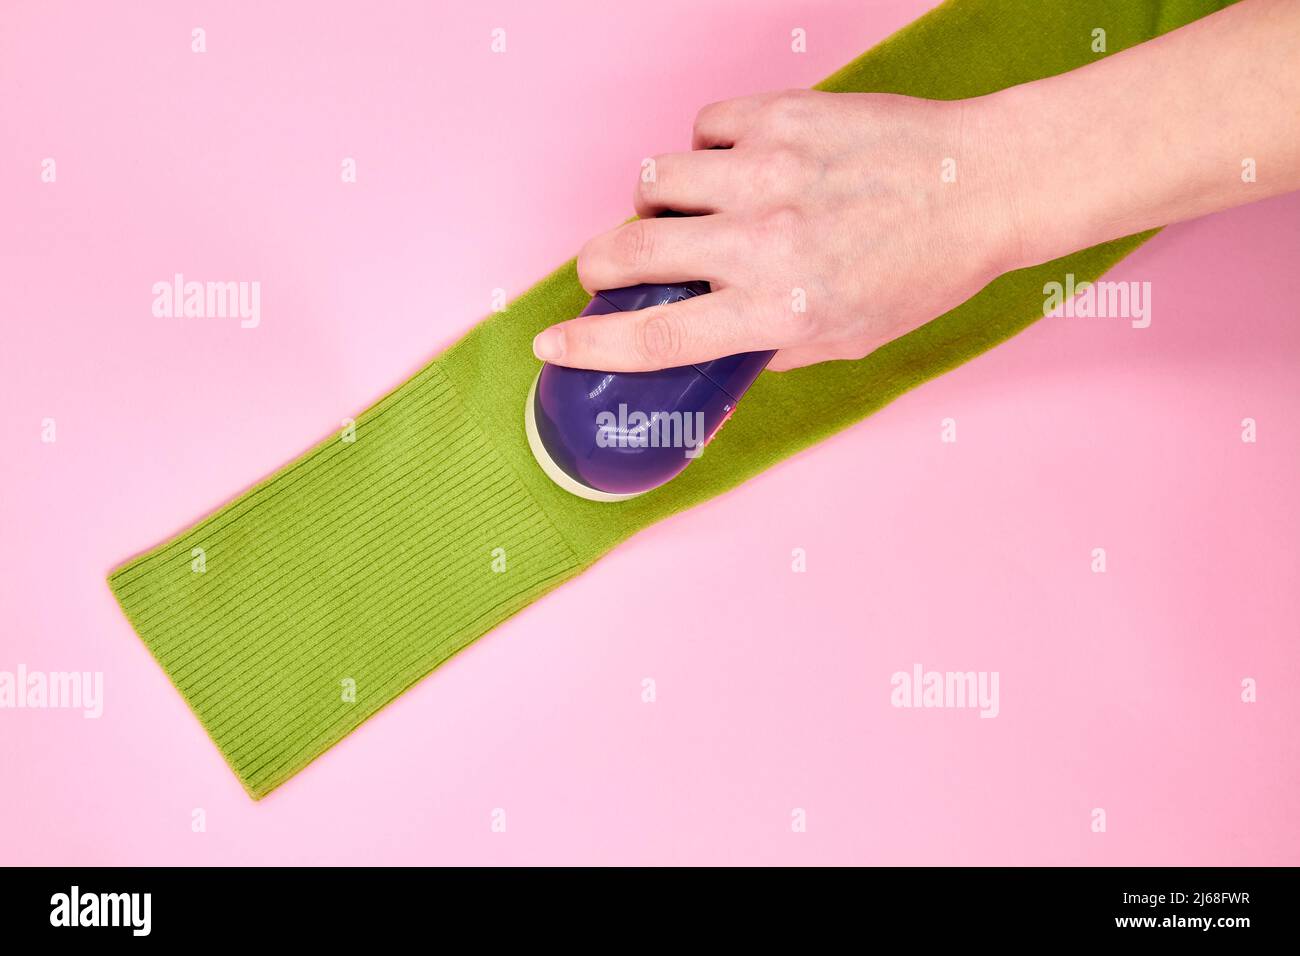 A wooman using Fabric shaver removes fabric pills from garments Stock Photo